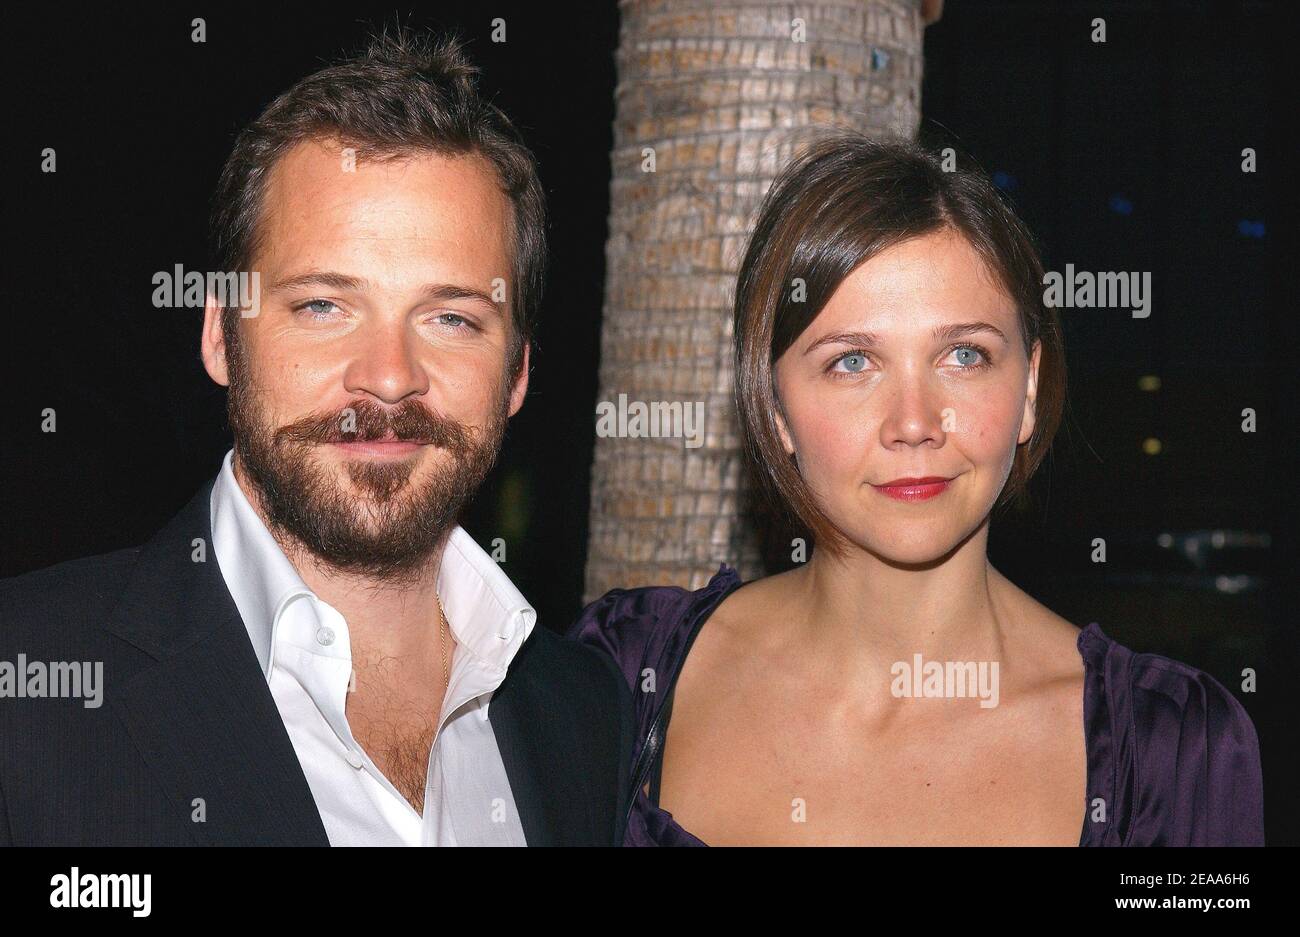 'Cast member Peter Sarsgaard and Maggie Gyllenhaal attend the world premiere of Universal Pictures ''Jarhead'' at the Arclight Hollywood. Los Angeles, October 27, 2005. Photo by Lionel Hahn/ABACAPRESS.COM' Stock Photo